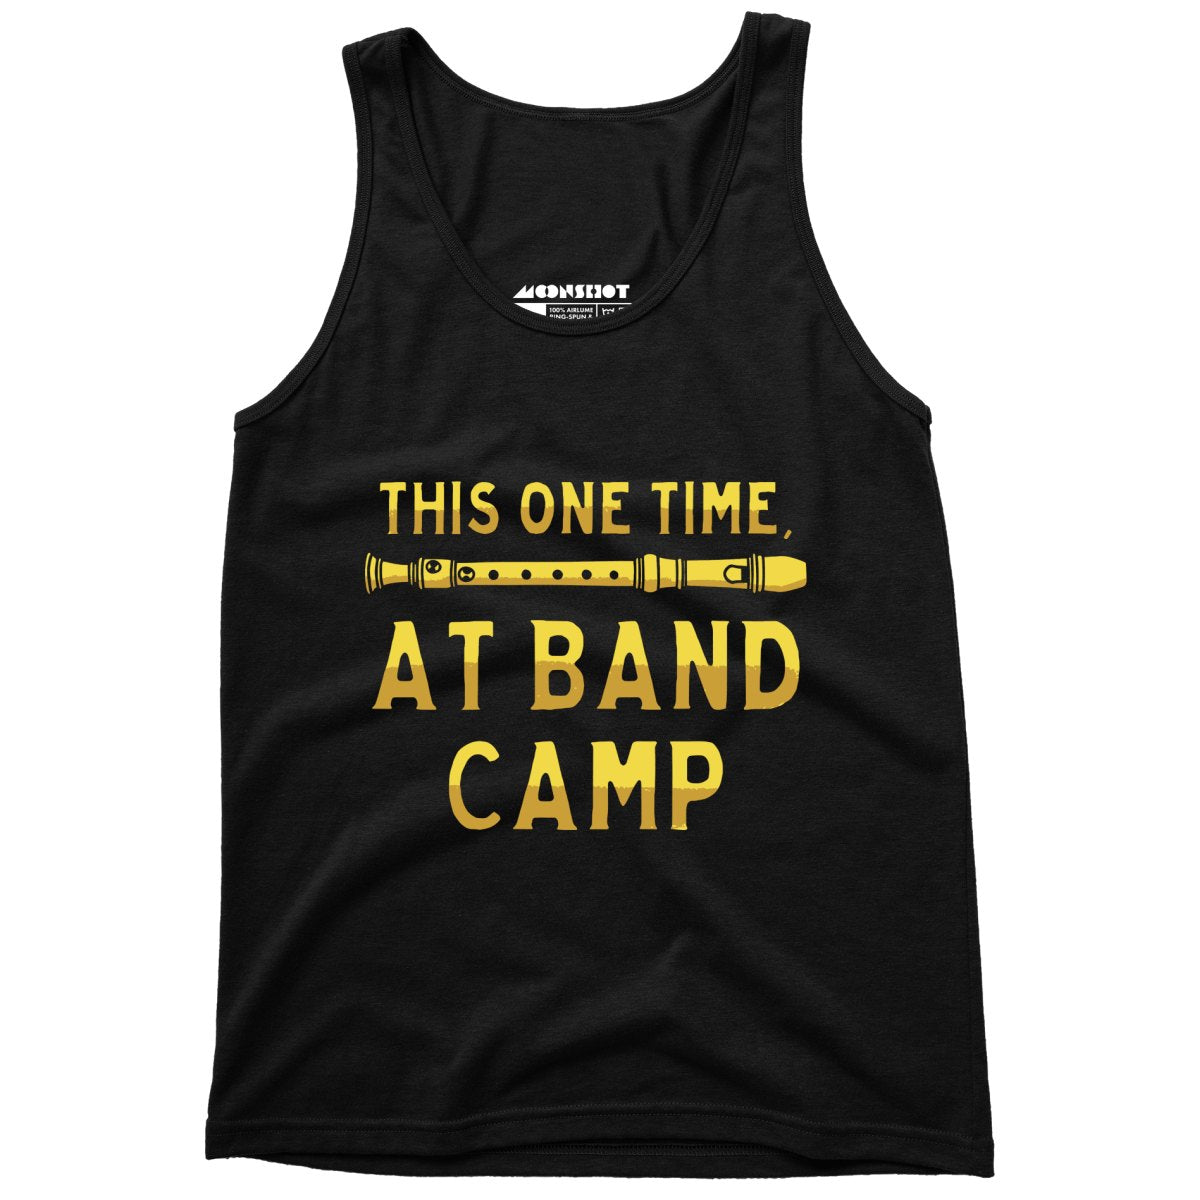 This One Time, at Band Camp - Unisex Tank Top